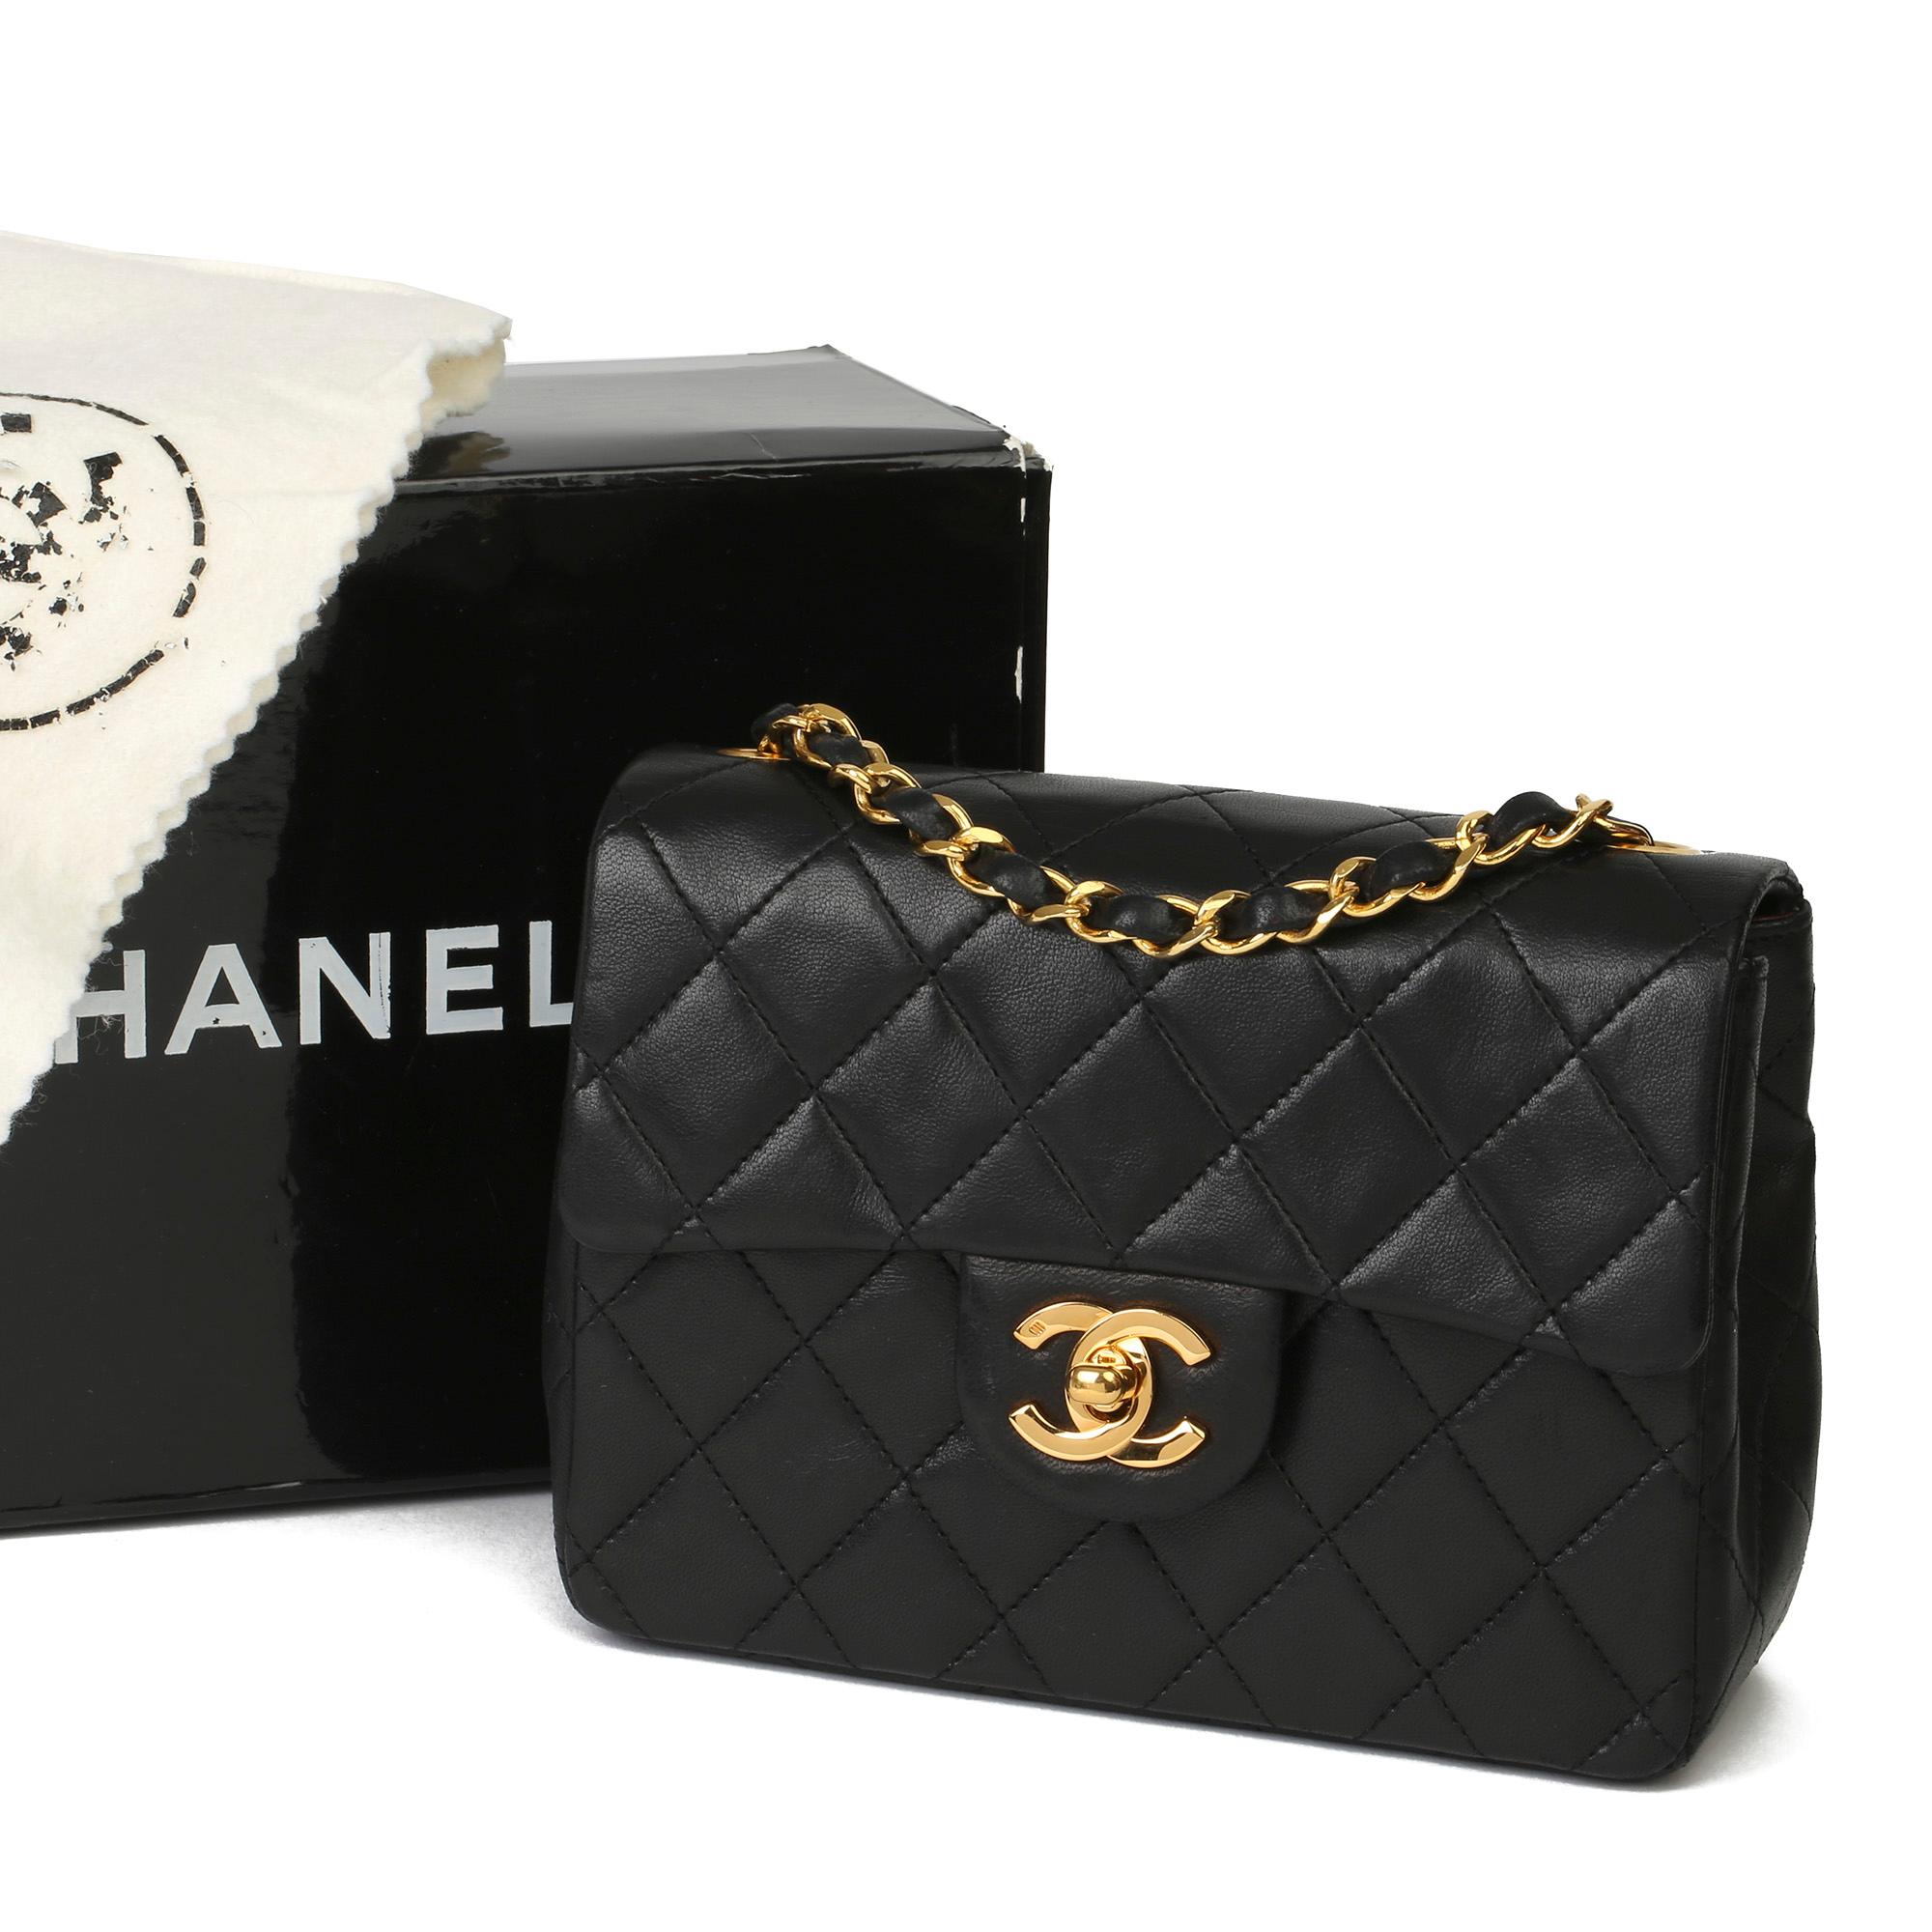 1989 Chanel Black Quilted Lambskin Vintage Mini Flap Bag  6